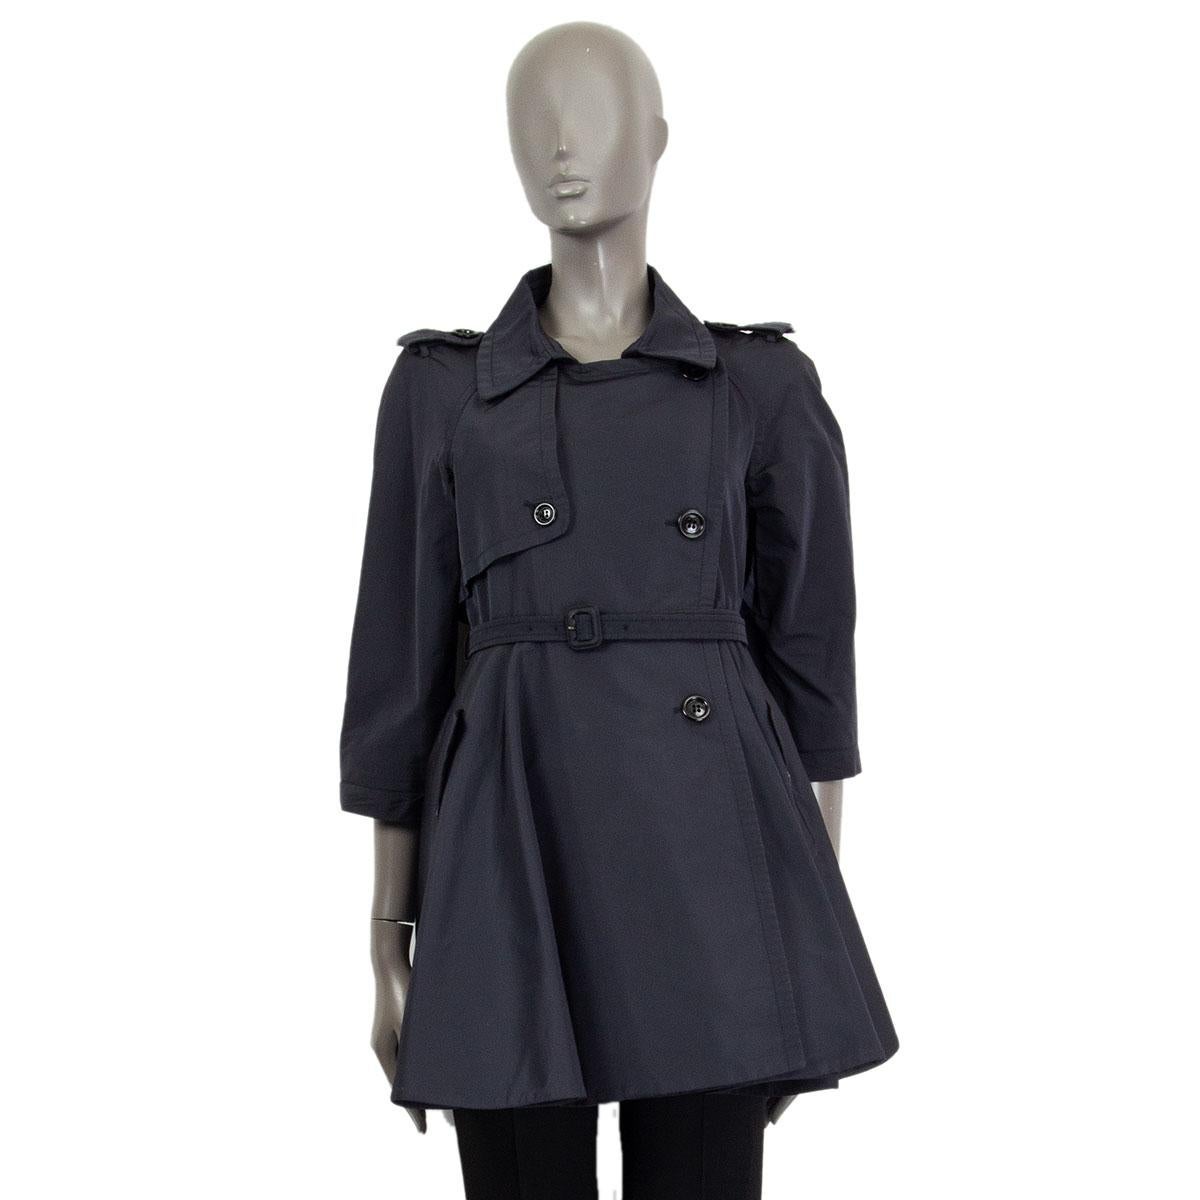 100% authentic Miu Miu double-breasted flared short trench coat in midnight blue polyester (53%) and acetate (47%). Features 3/4 sleeves, waist belt, a gun flap and epaulettes. Has been worn and is in excellent condition. 

Tag Size 42
Size